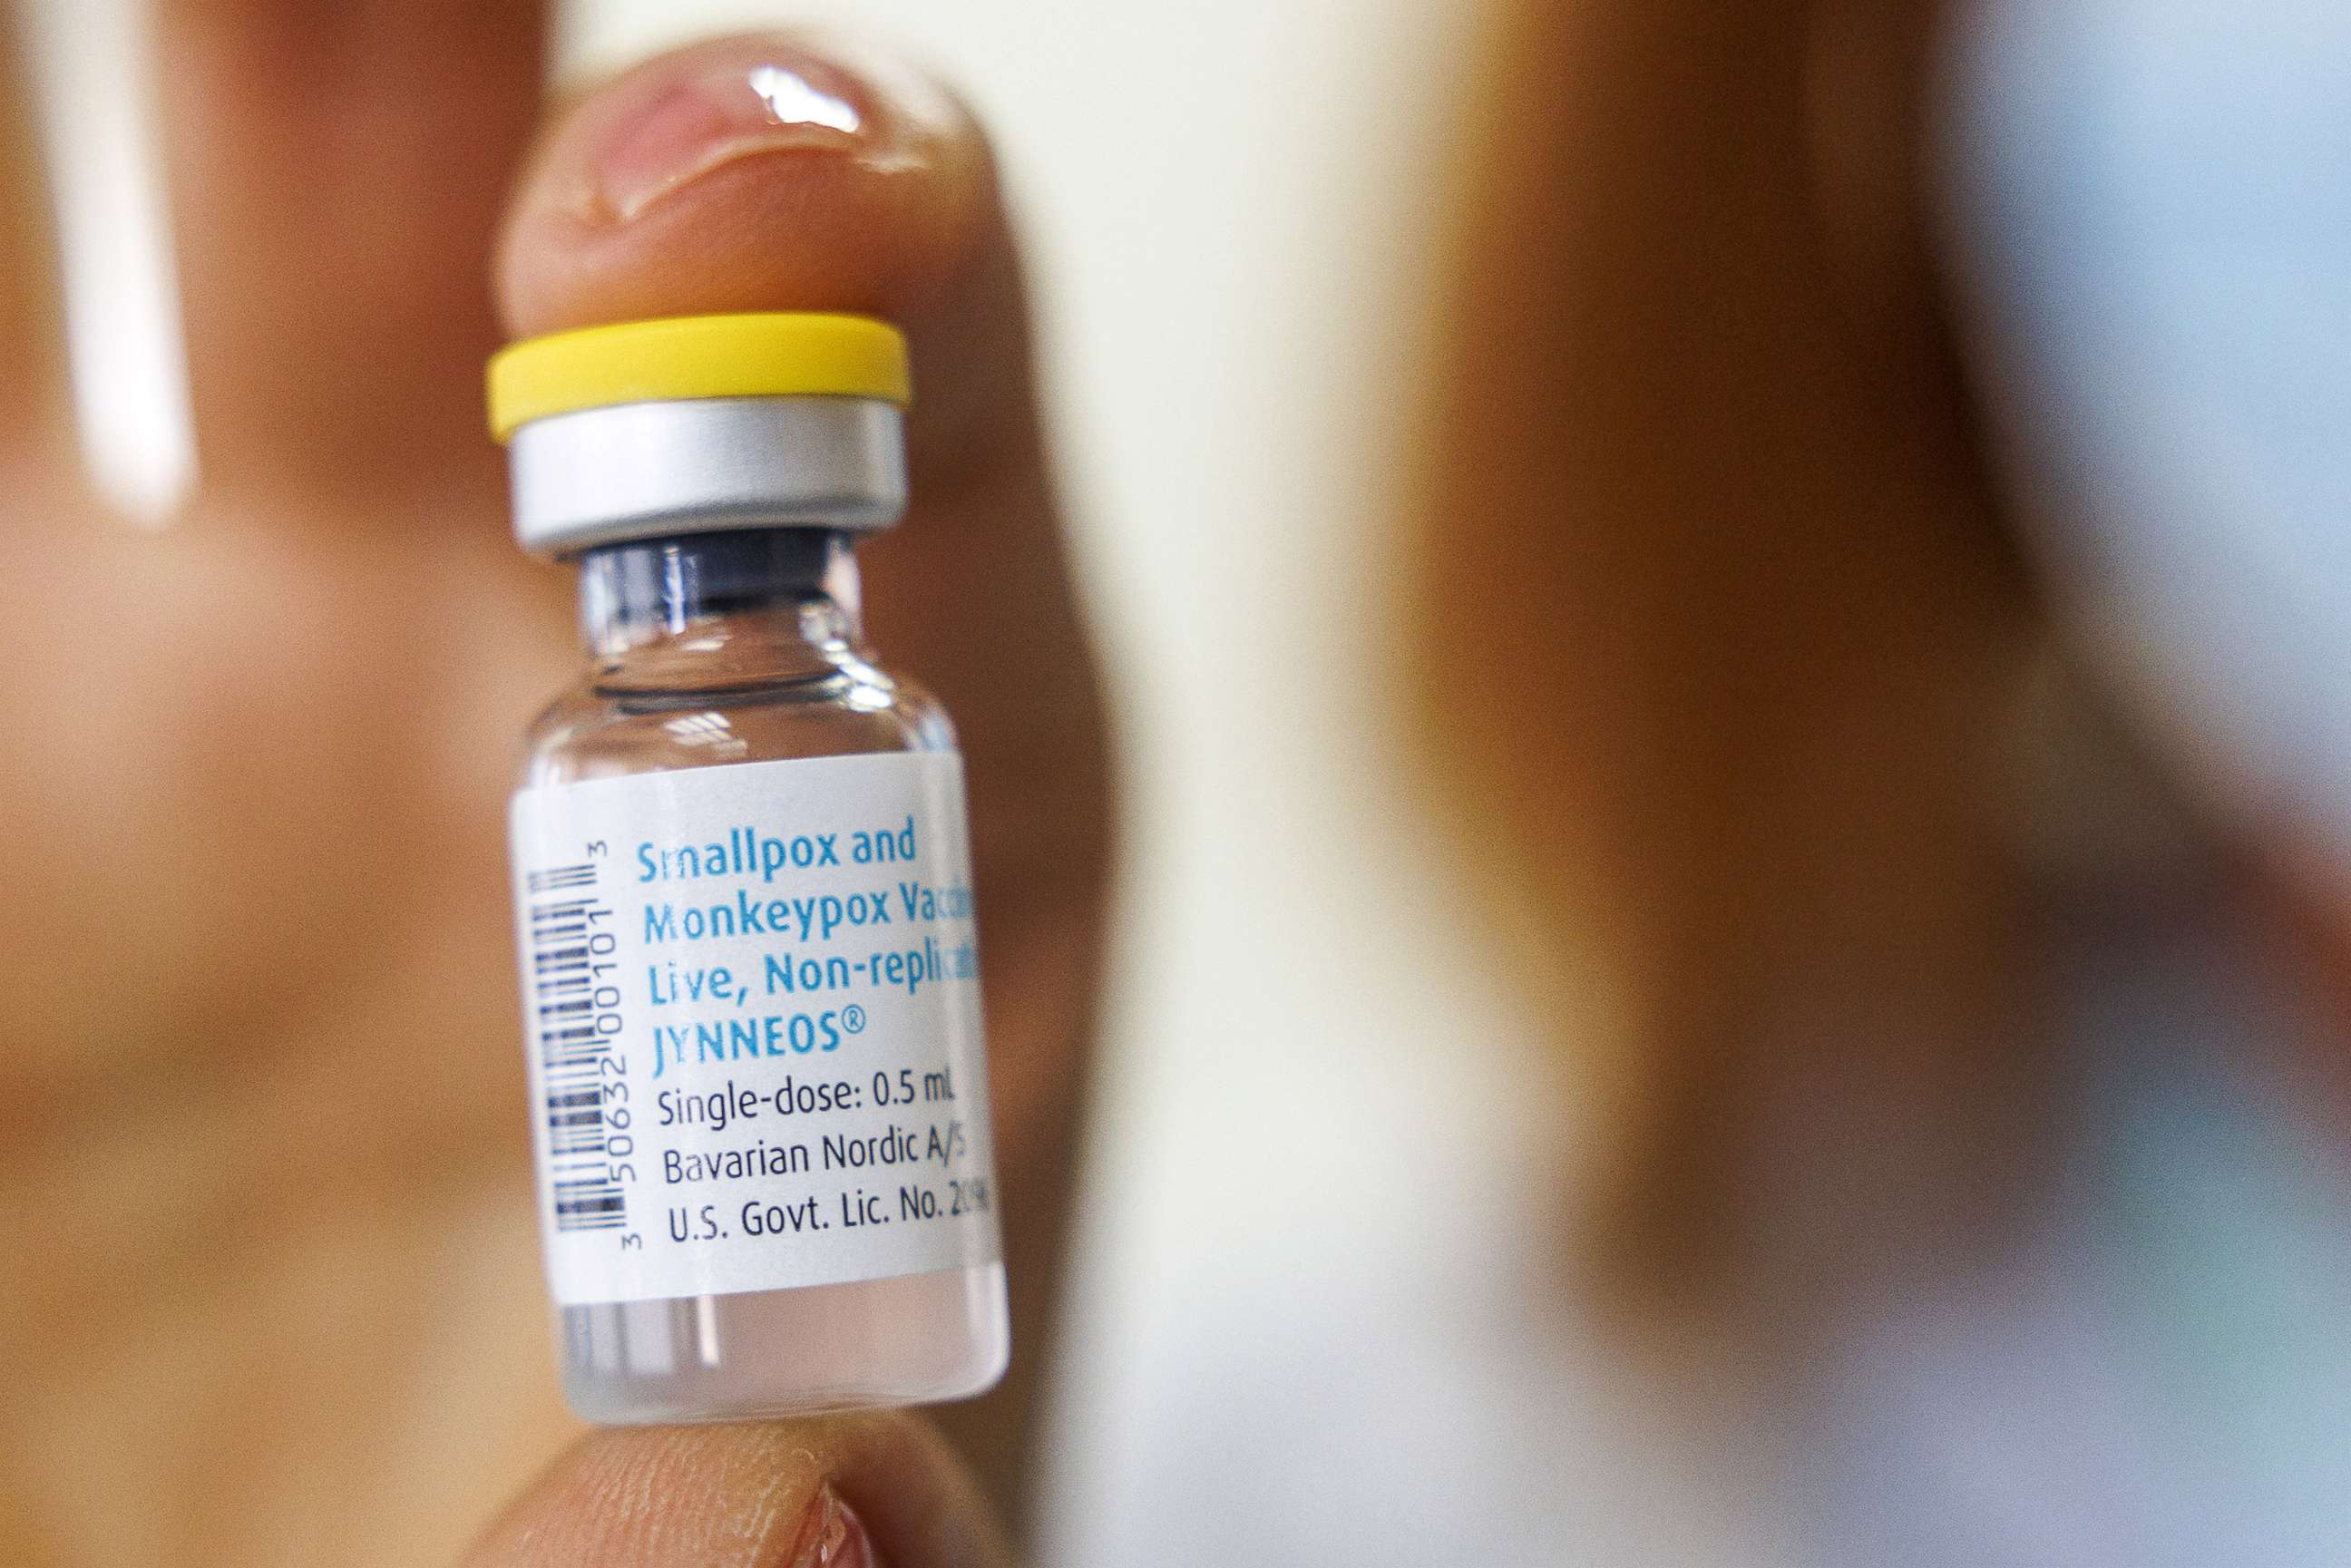 PHOTO: A health worker handles a vial of the Bavarian Nordic A/S Jynneos monkeypox vaccine at the Calit Medical Center in Tel Aviv, Israel, July 31, 2022. 